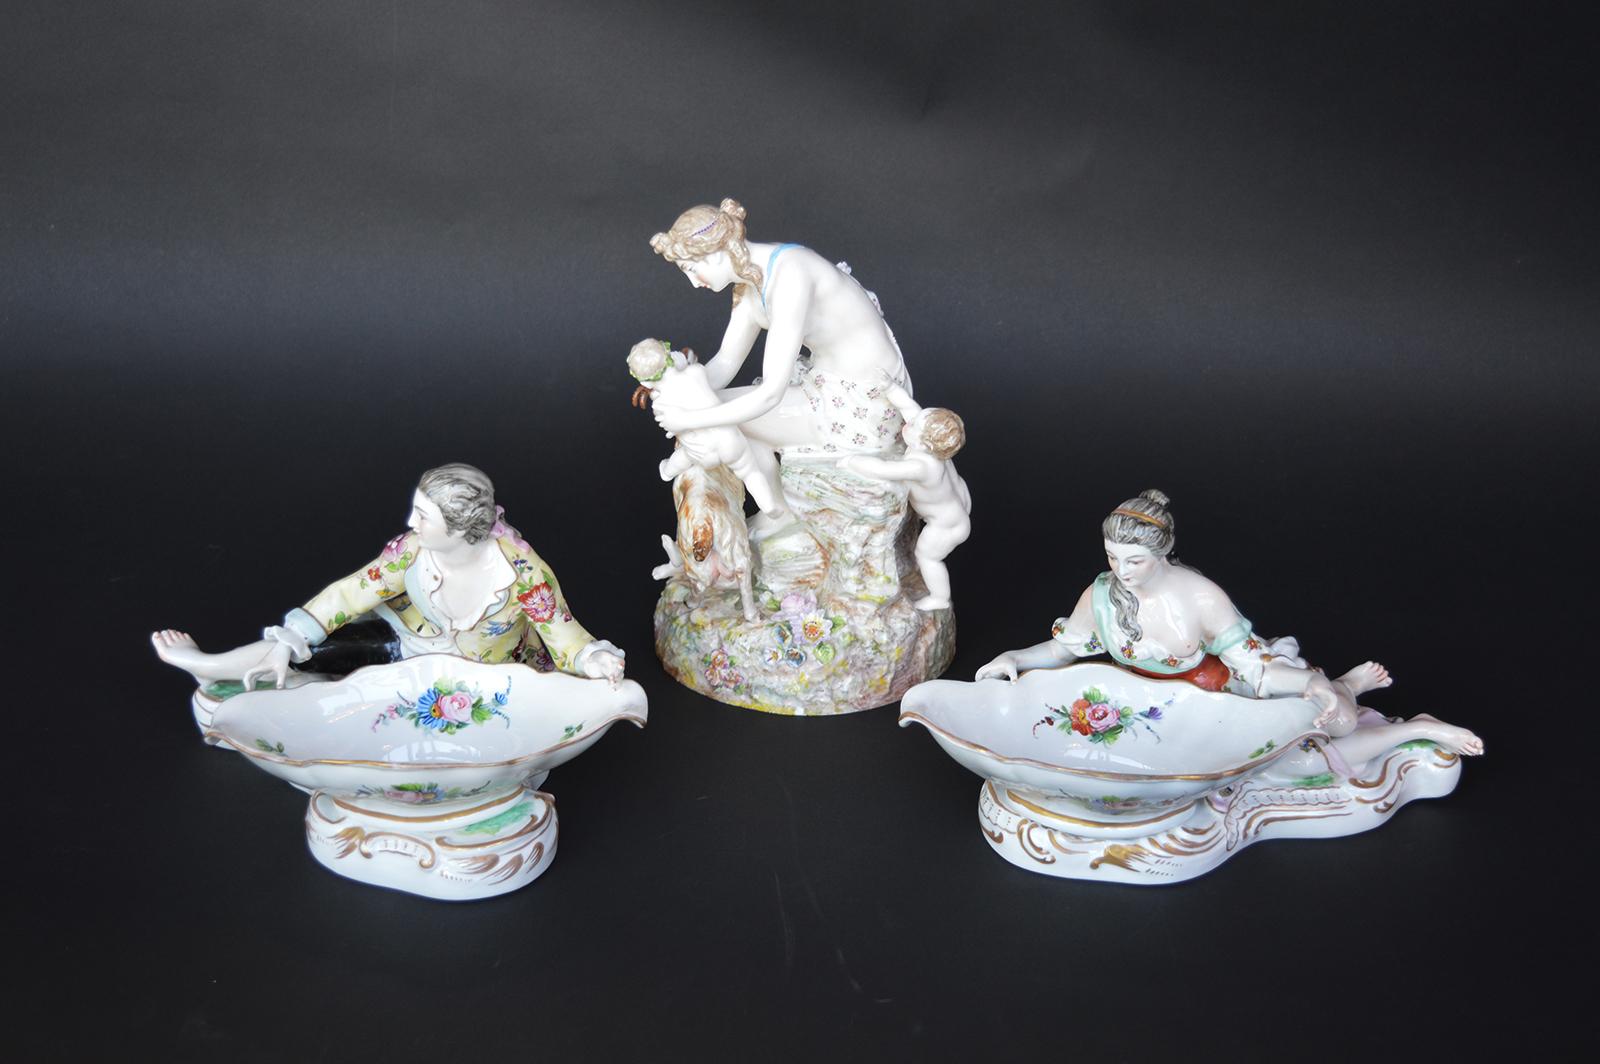 Three Meissen figures. Two sweet meat dishes and a figure. Measures: 10